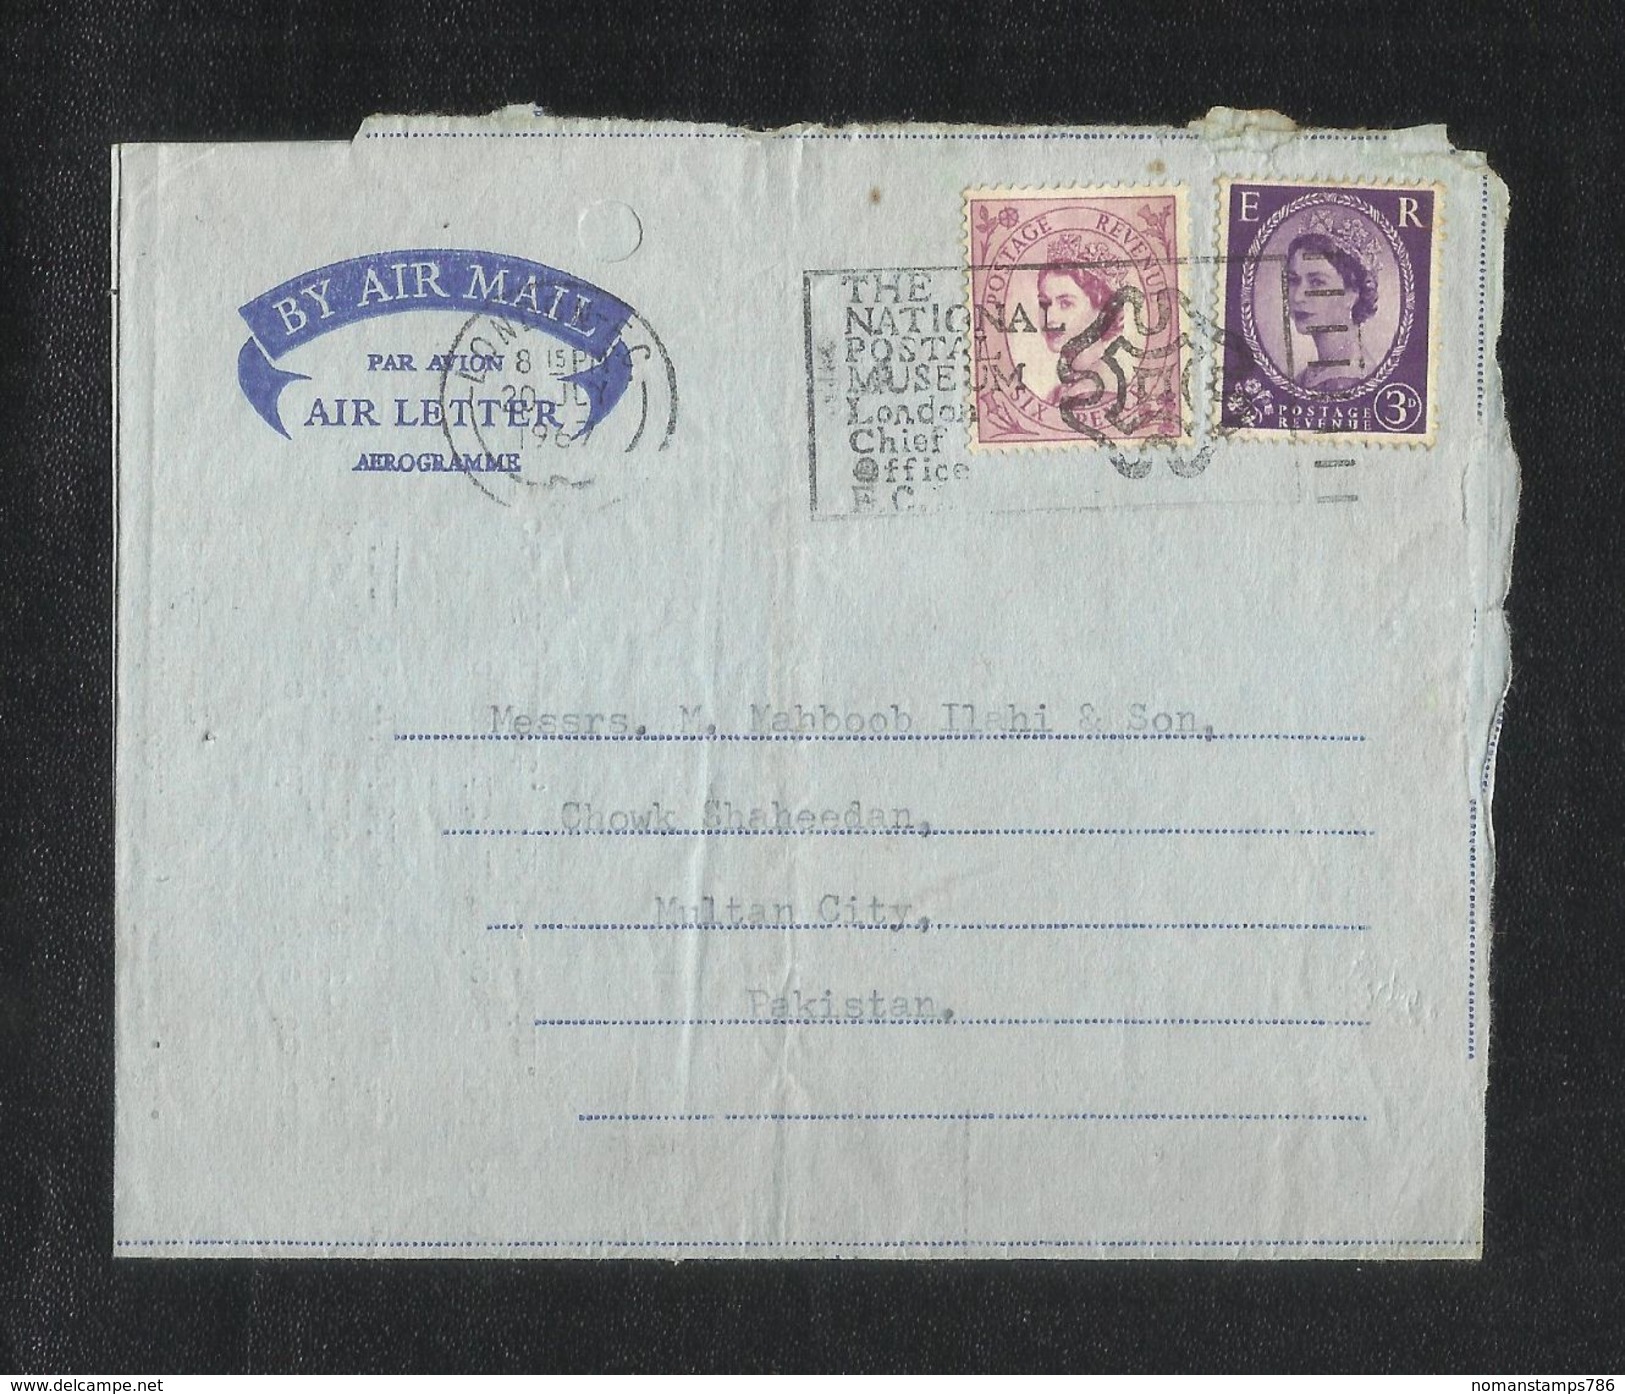 Great Britain England 1967 Slogan Postmark Air Mail Postal Used Air Letter Aerogramme Cover London To Pakistan - Stamped Stationery, Airletters & Aerogrammes